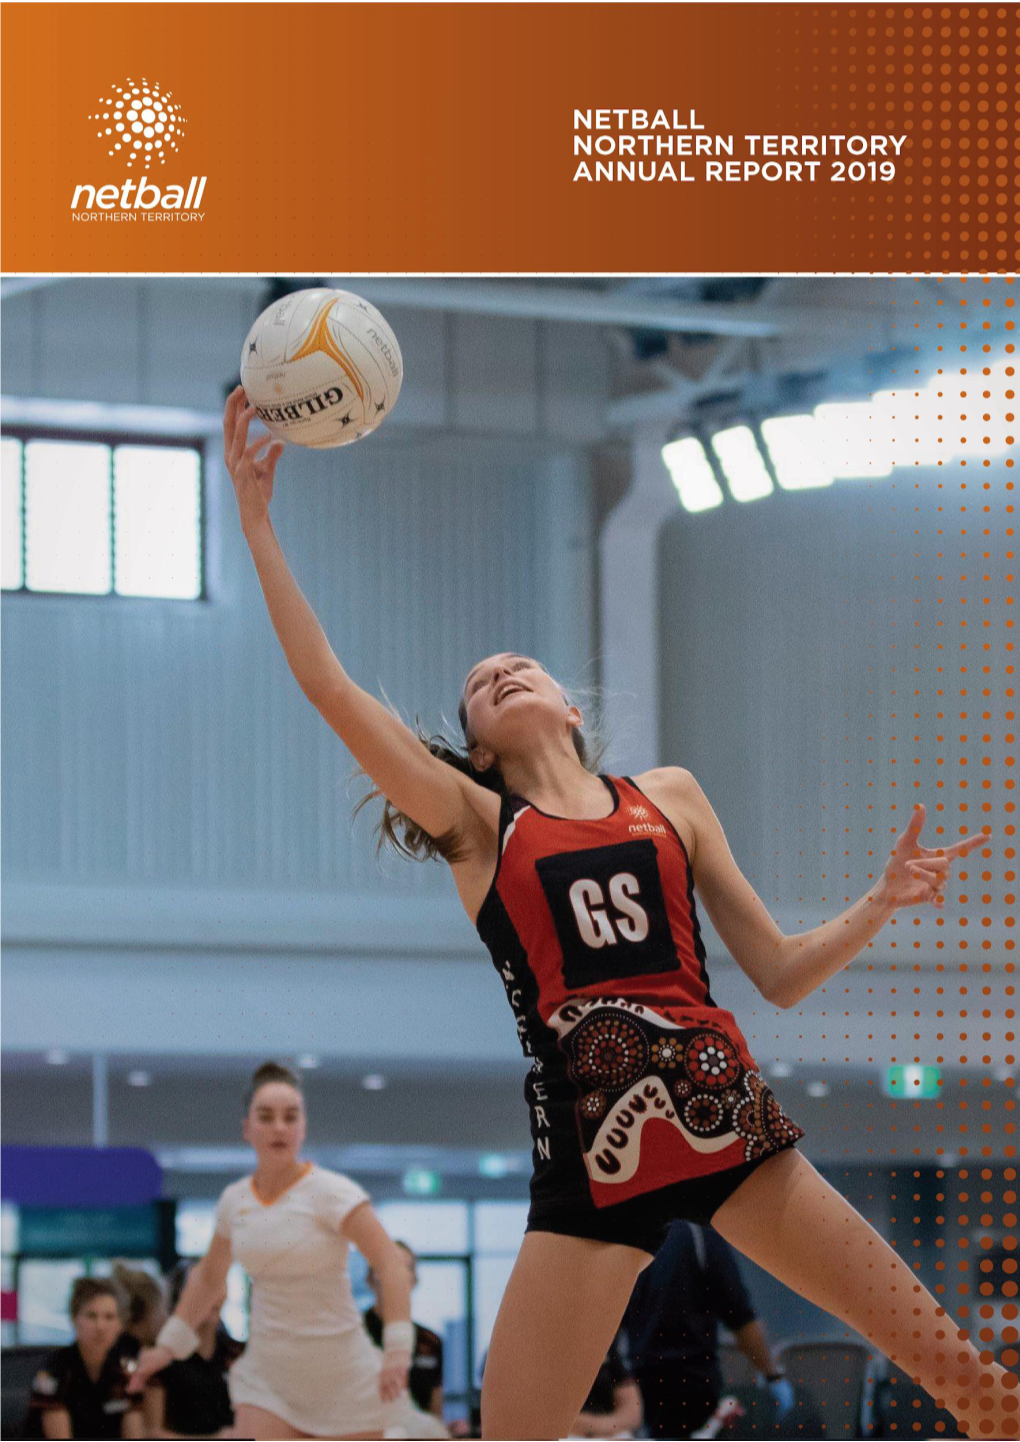 Netball Northern Territory Annual Report 2019